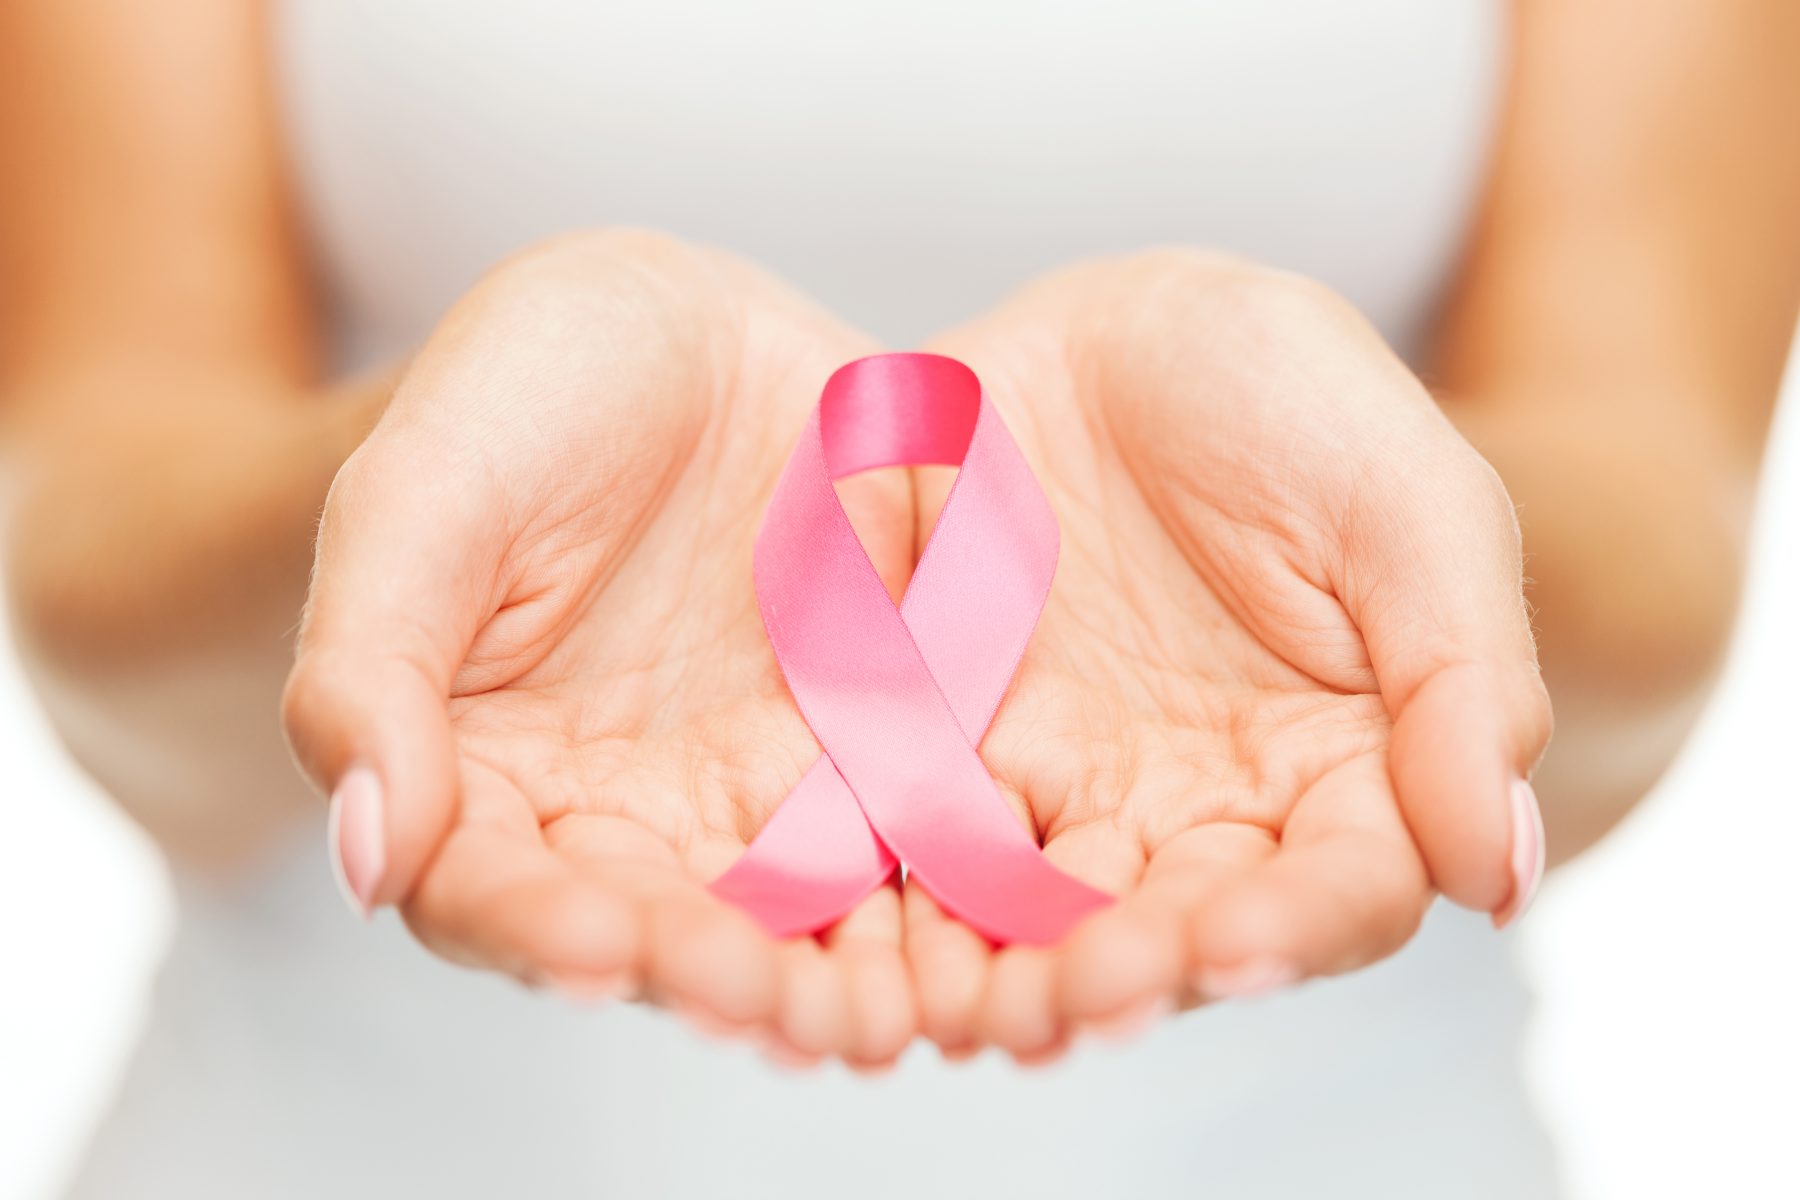 7 Steps to Help Prevent Breast Cancer